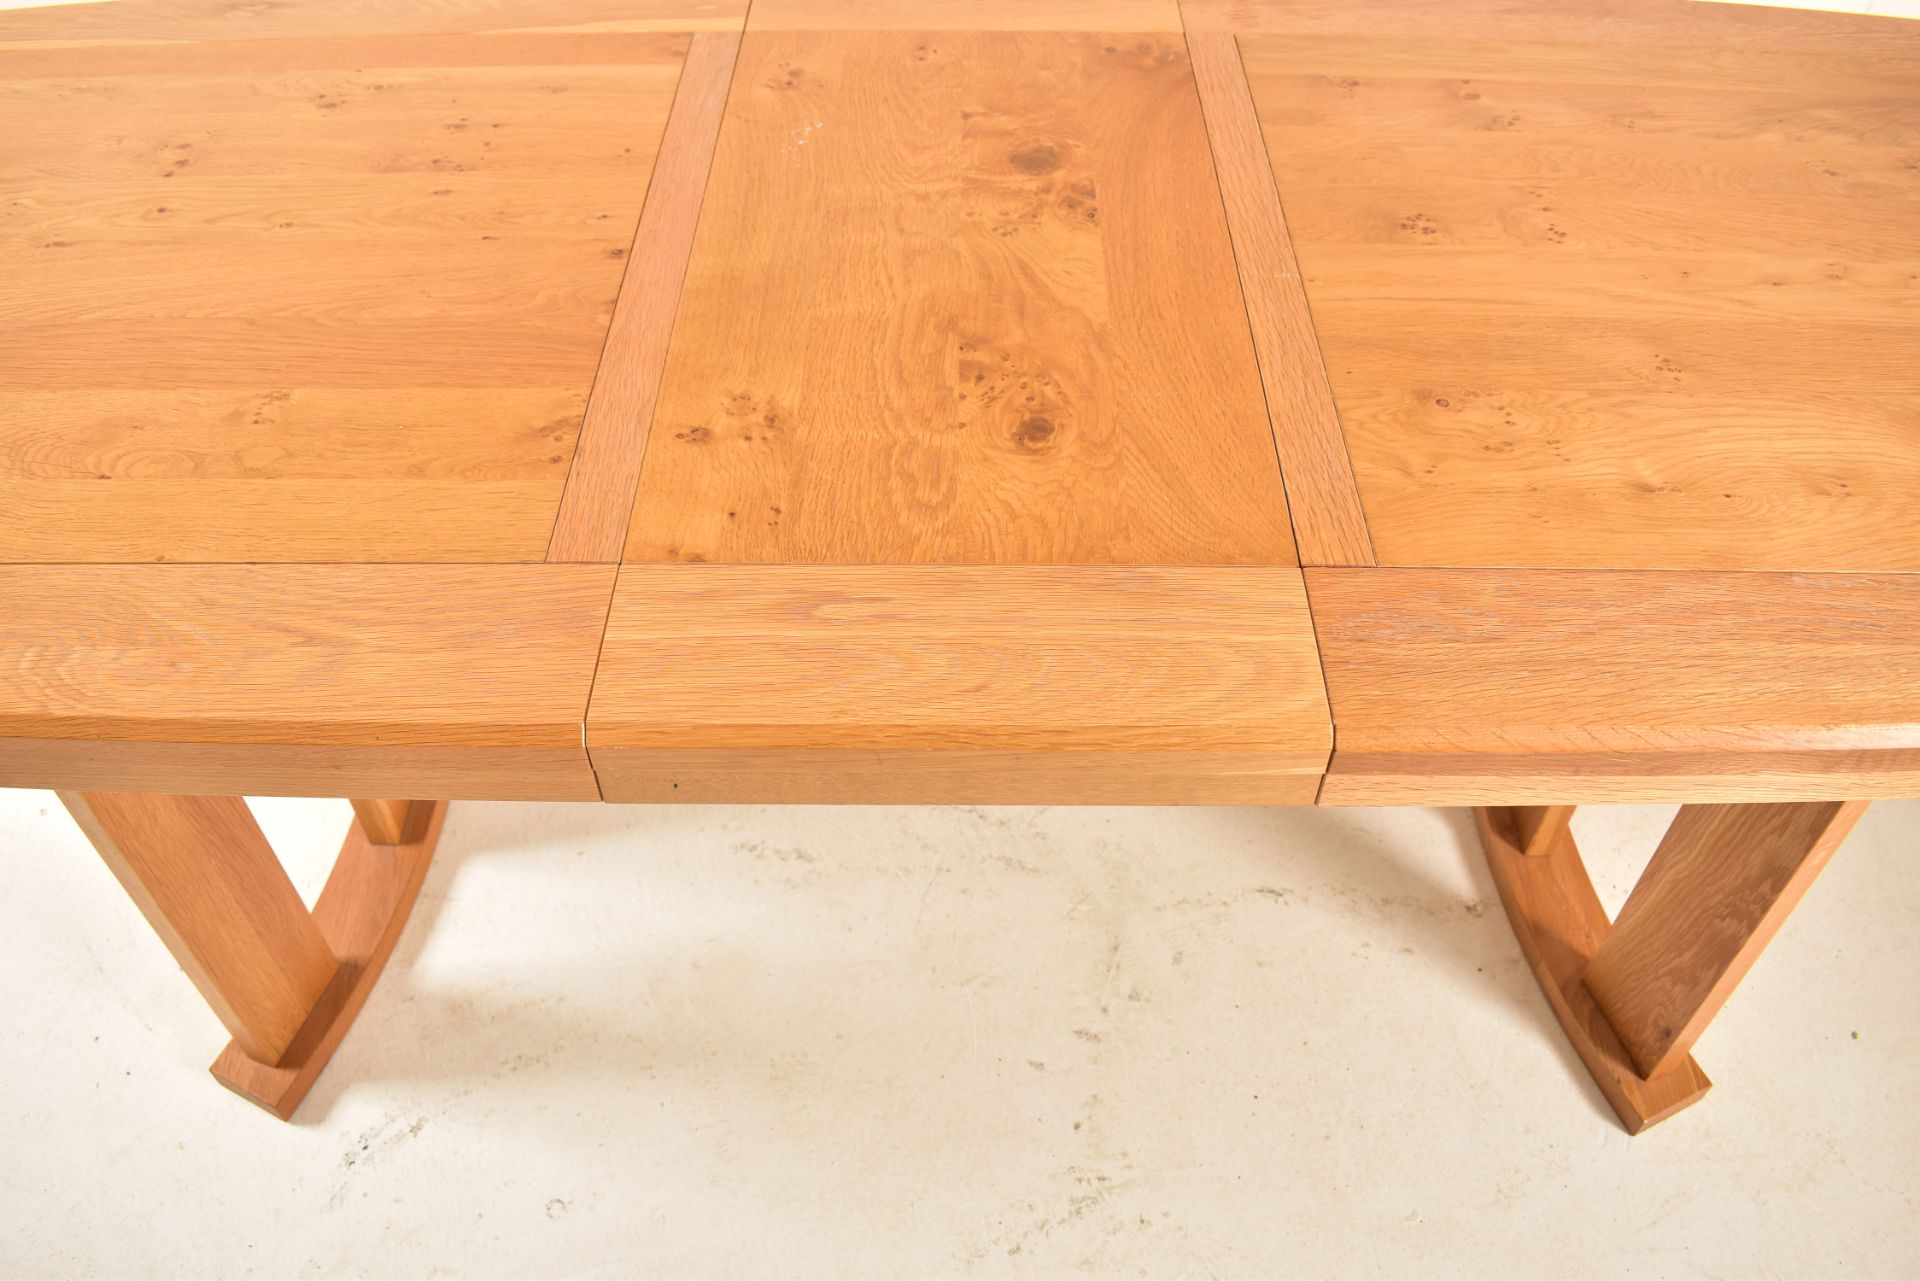 CONTEMPORARY HIGH END BRITISH DESIGN OAK DINING TABLE - Image 3 of 6